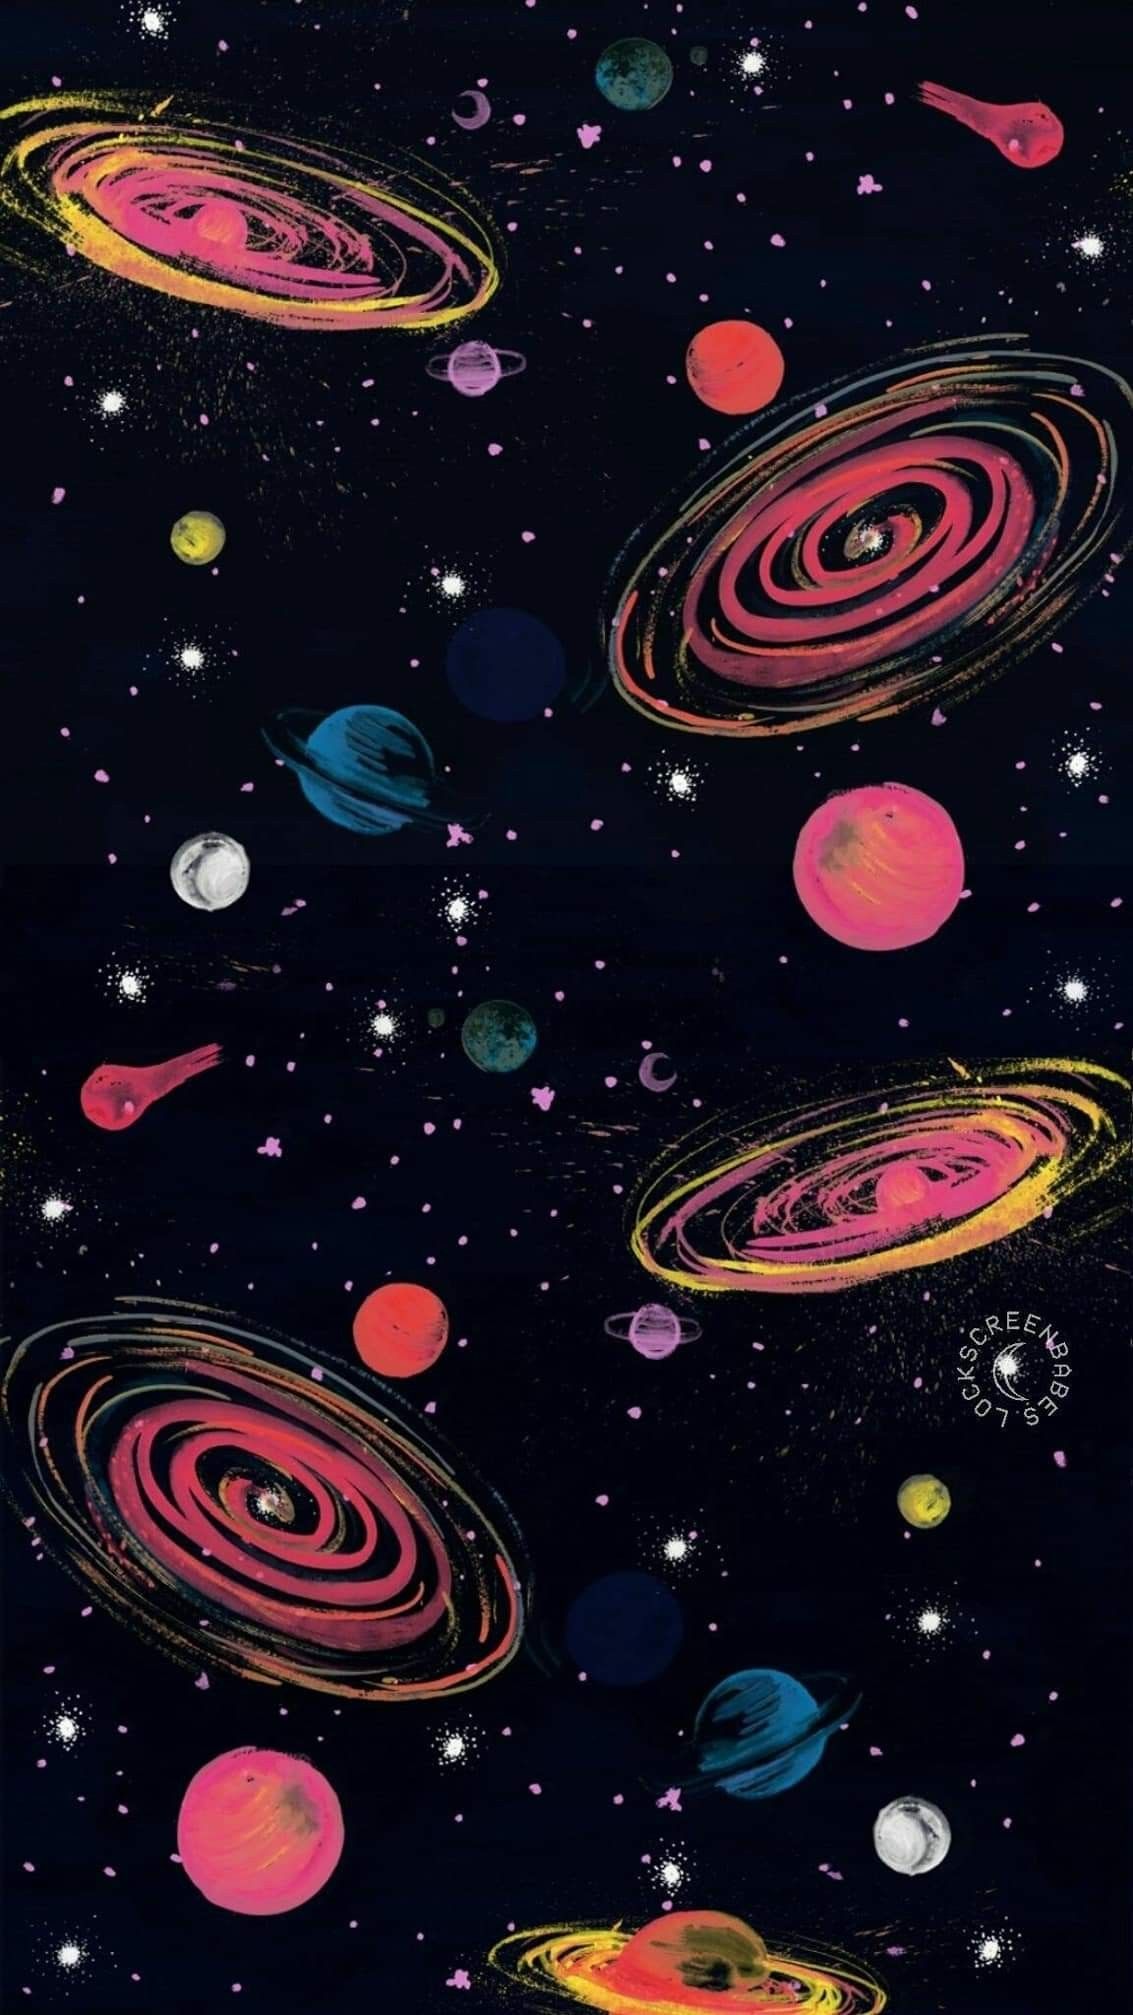 IPhone wallpaper of the day  - Space, NASA